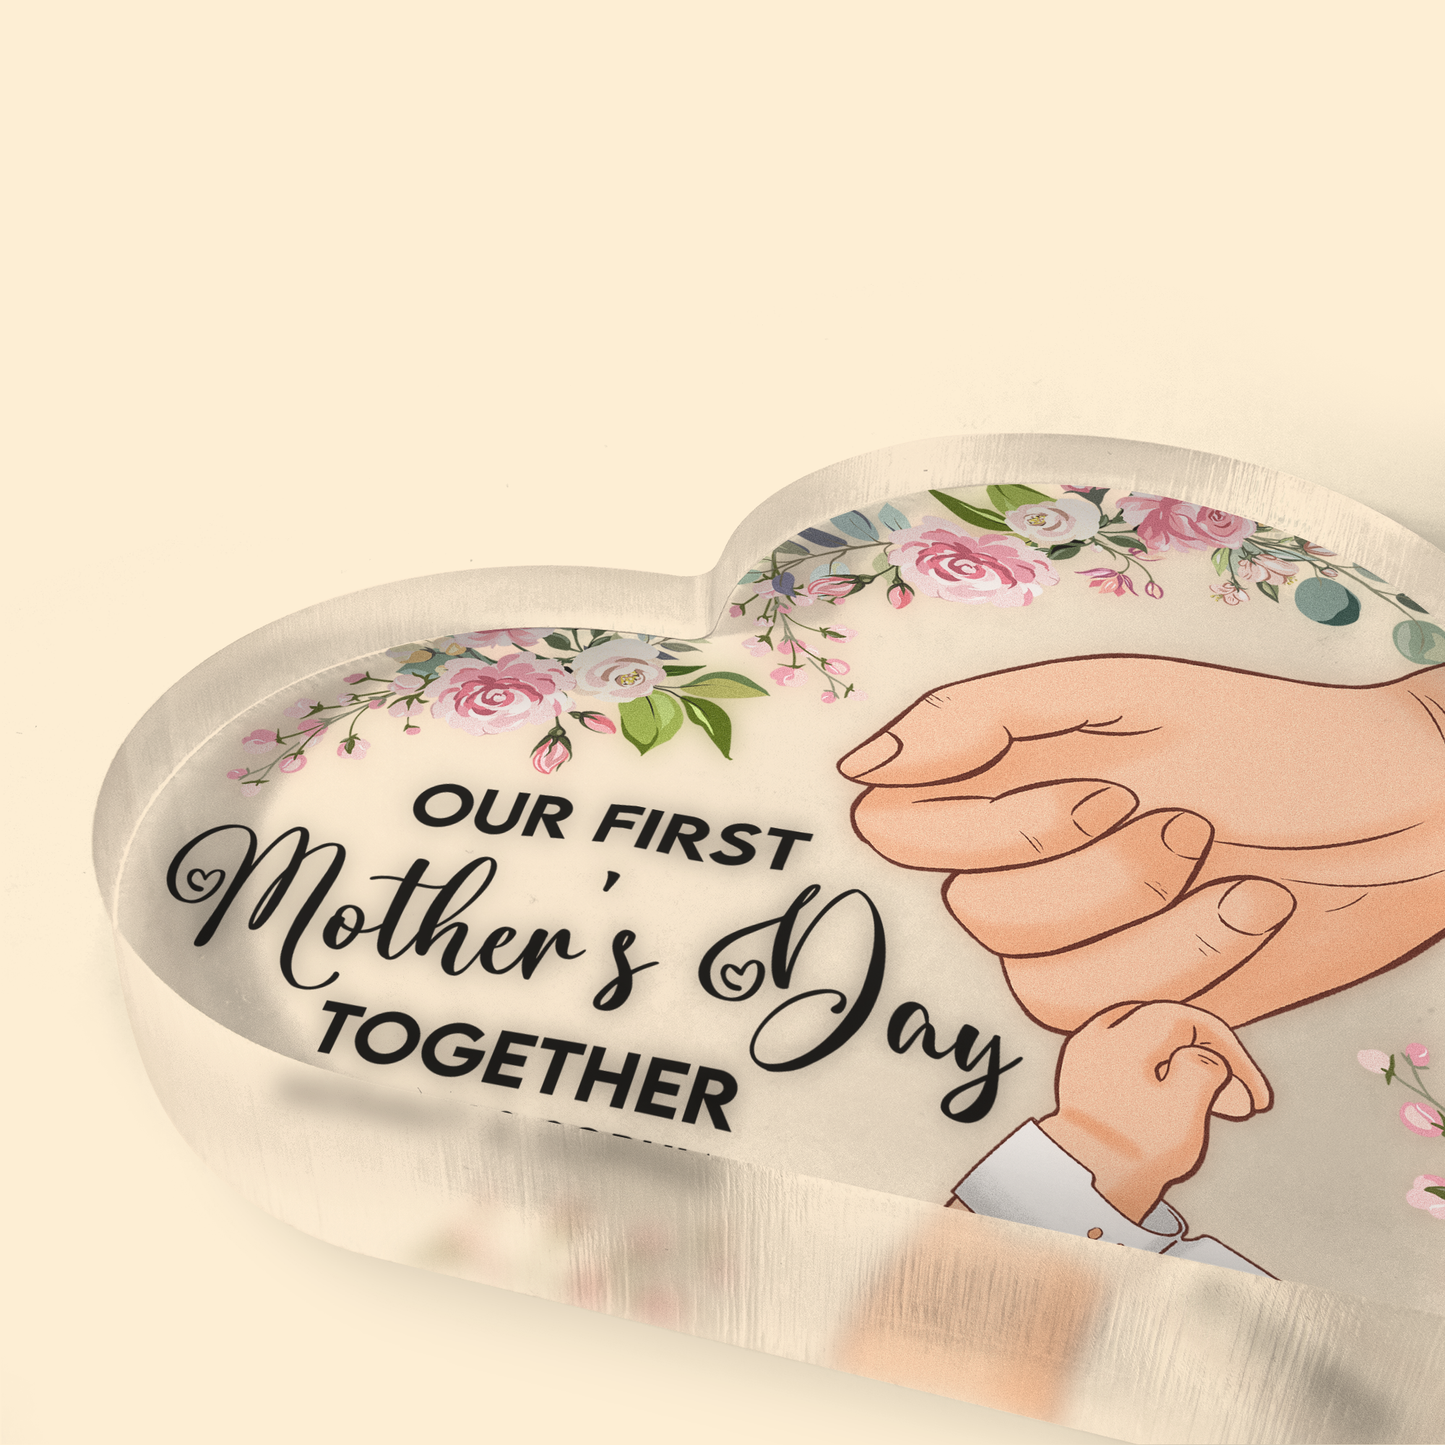 Our First Mother's Day Together - Personalized Heart Shaped Acrylic Plaque